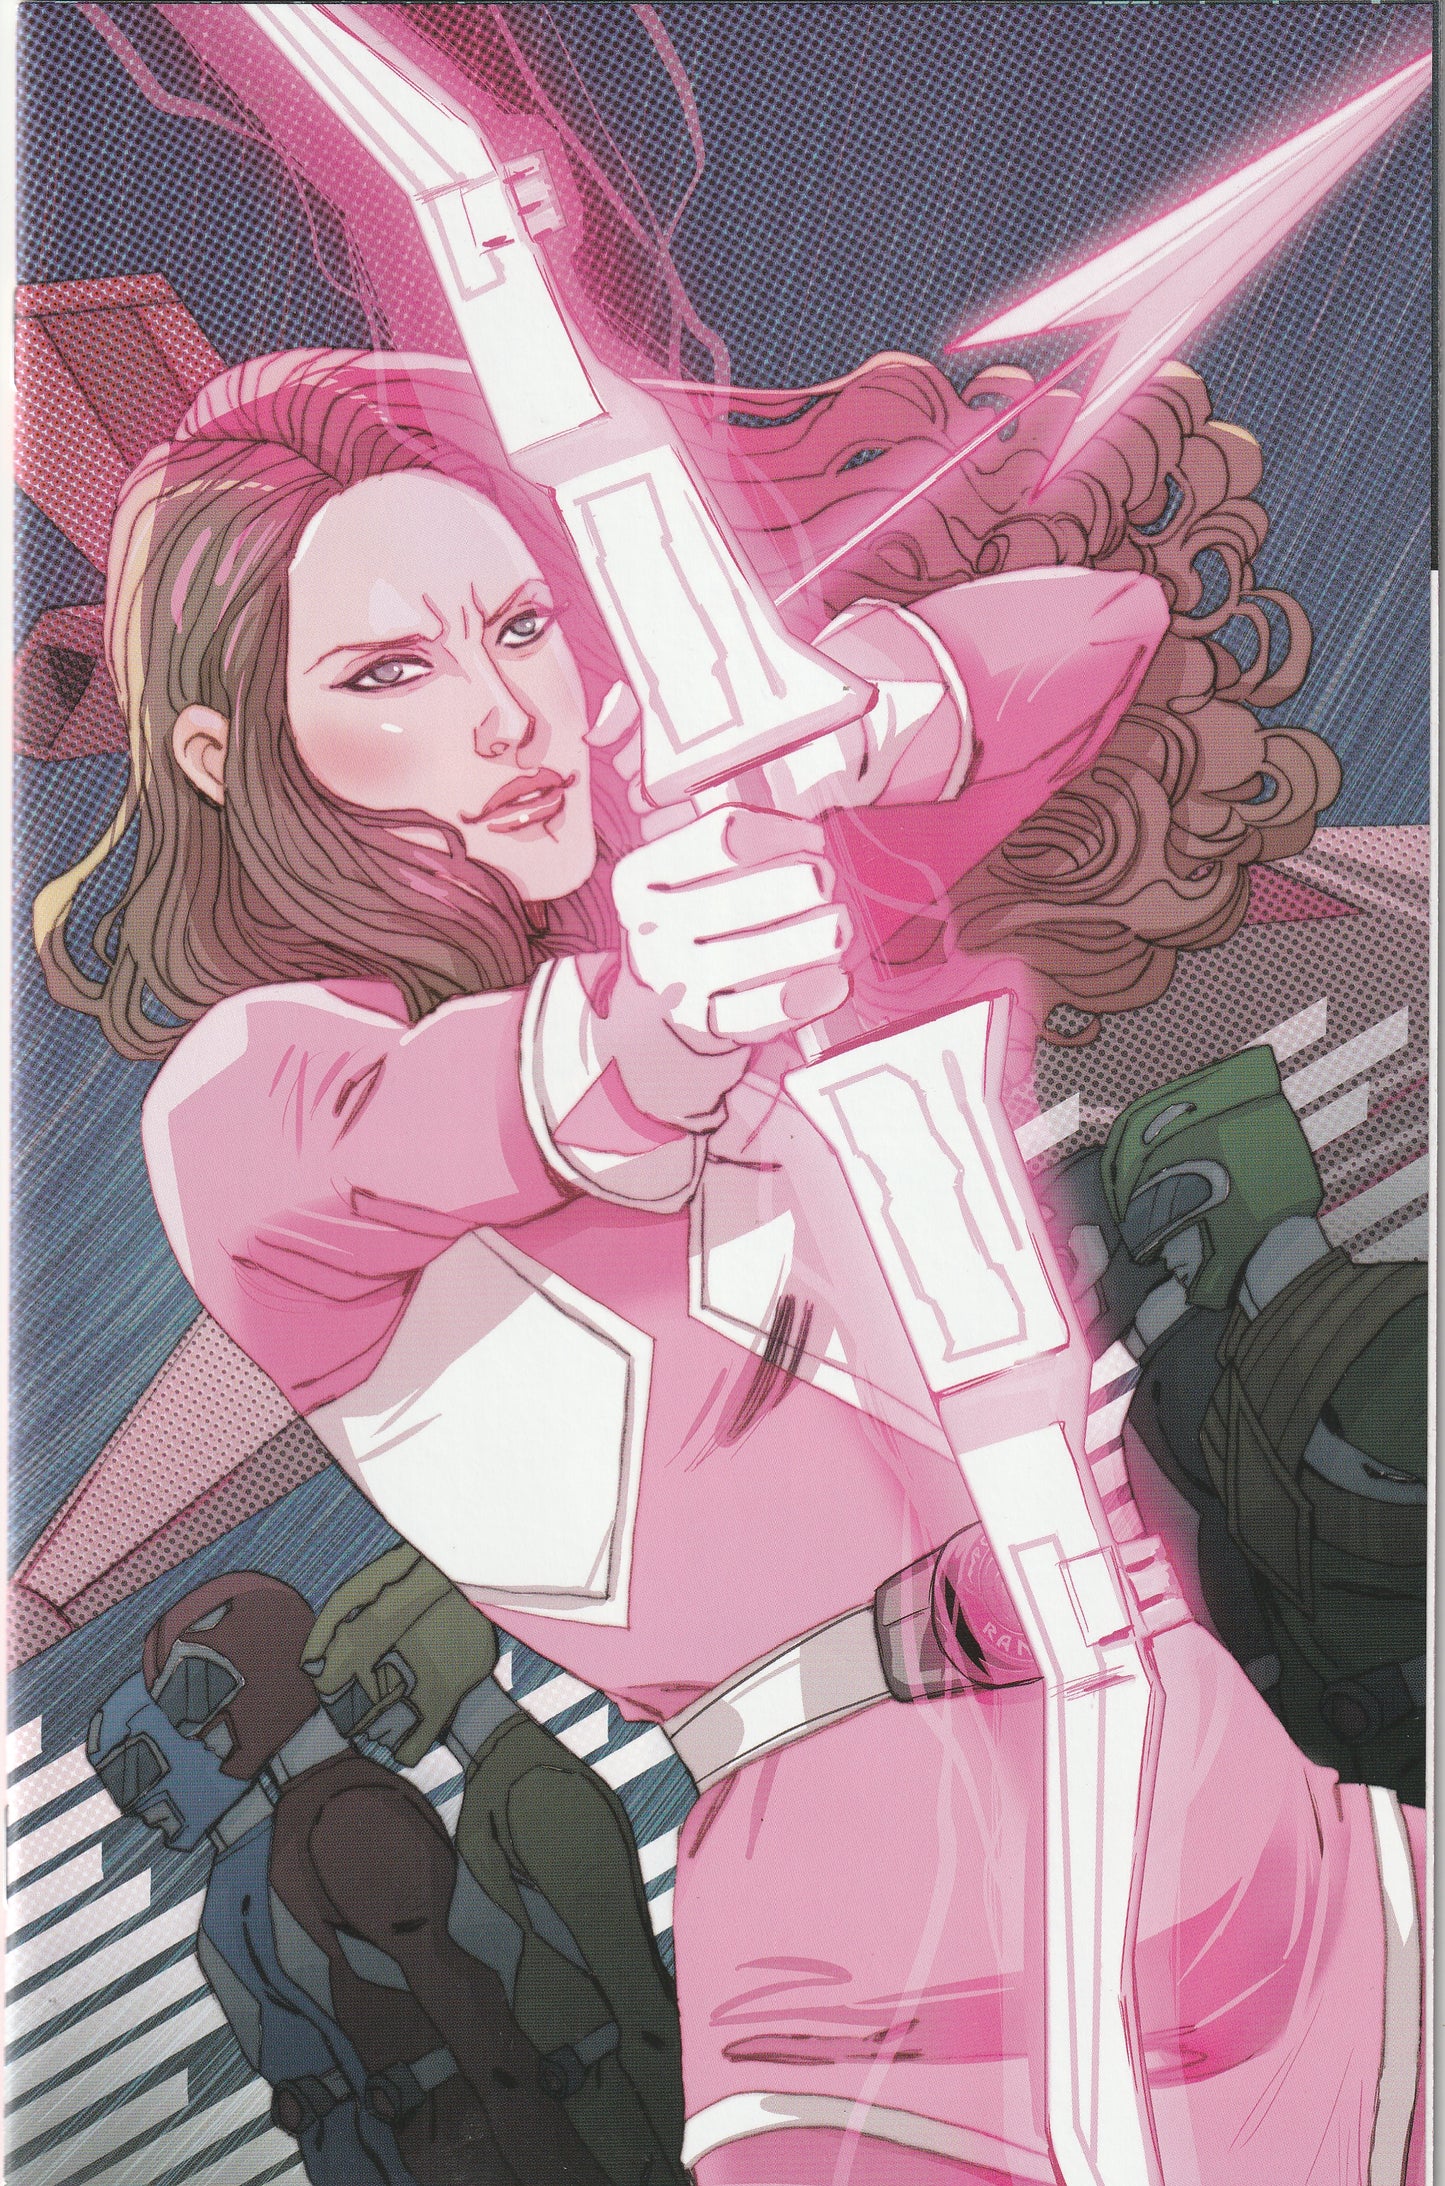 Mighty Morphin Power Rangers Pink #1 (of 6) (2016) - Marguerite Sauvage Virgin Variant Cover 1:10